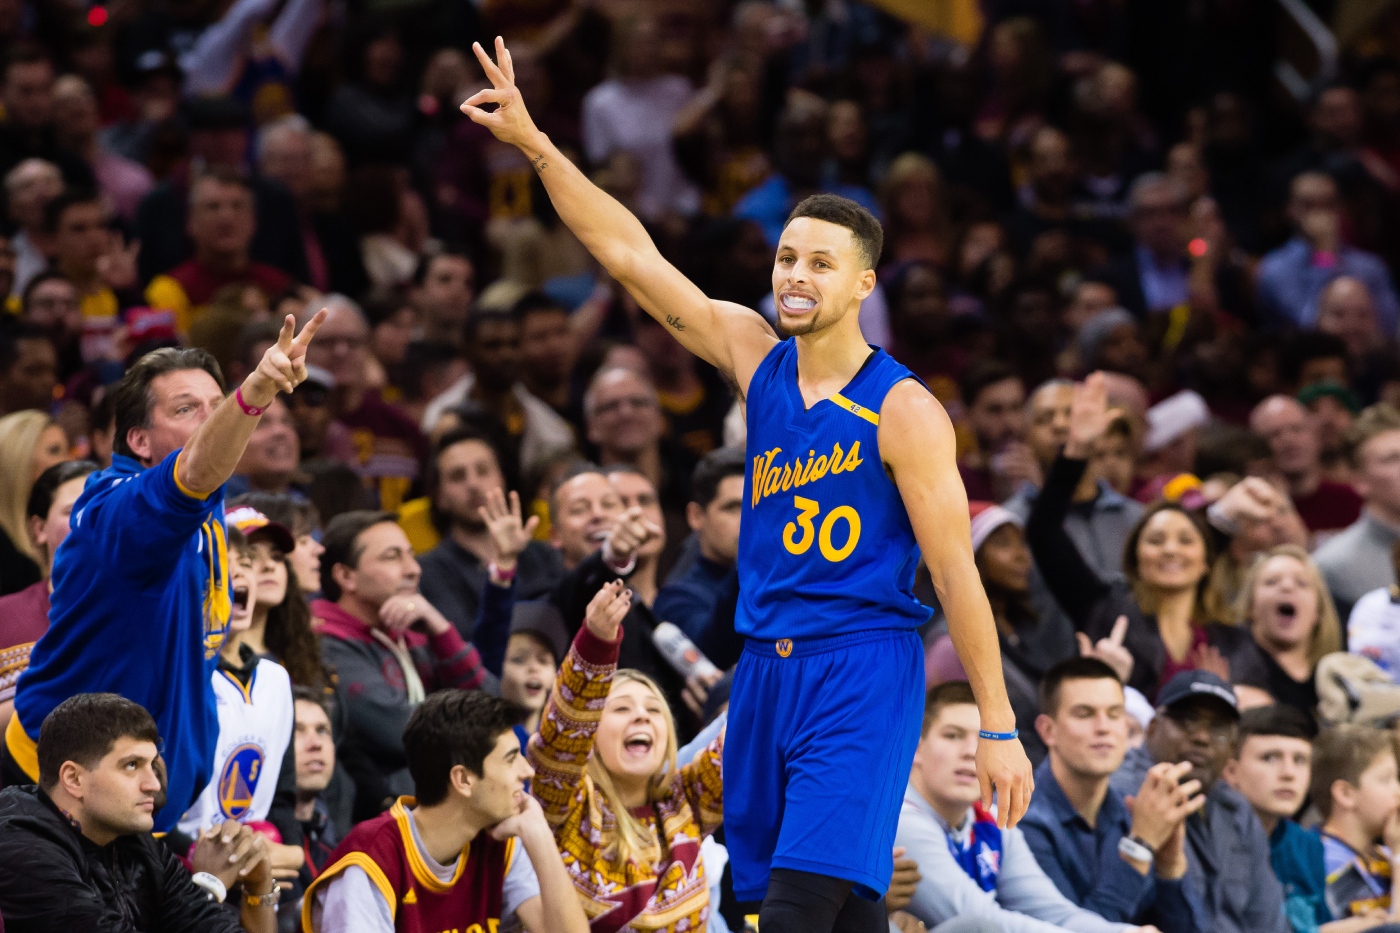 Stephen Curry looks to have a big year for the Golden State Warriors. His former teammate just sent a strong message about Curry, too.